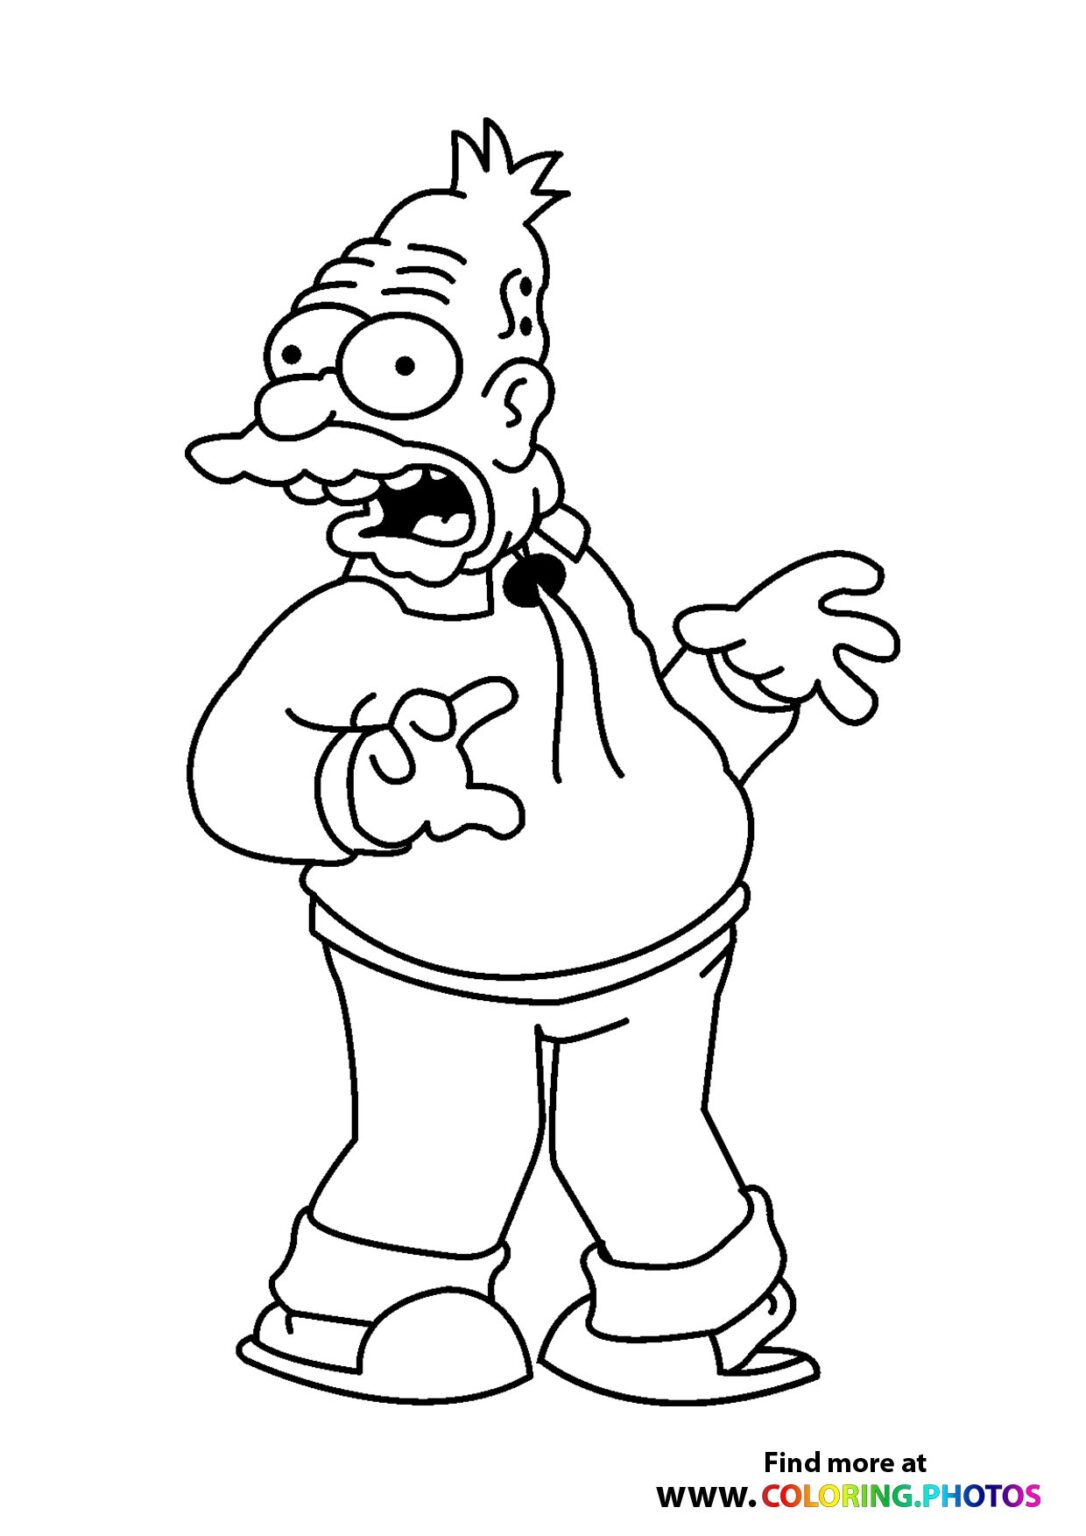 The Simpsons Grandpa Coloring Pages for kids